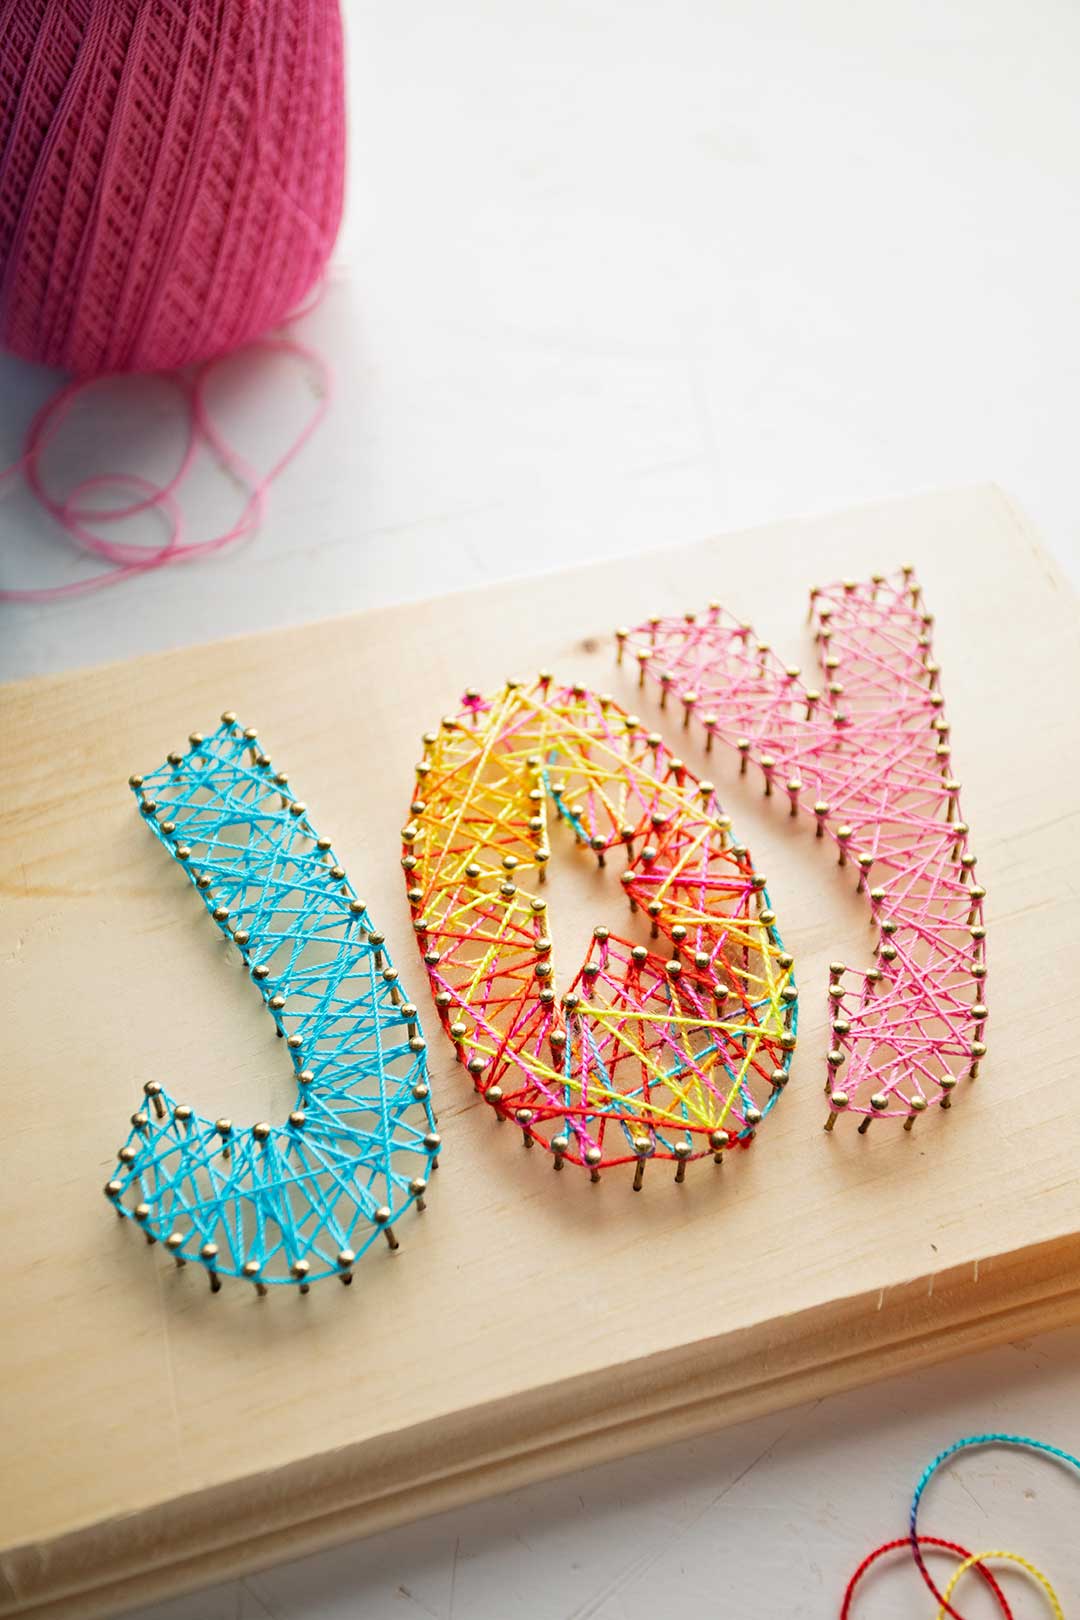 Angle close up of finished "joy" string art in blue, multi color and pink string.